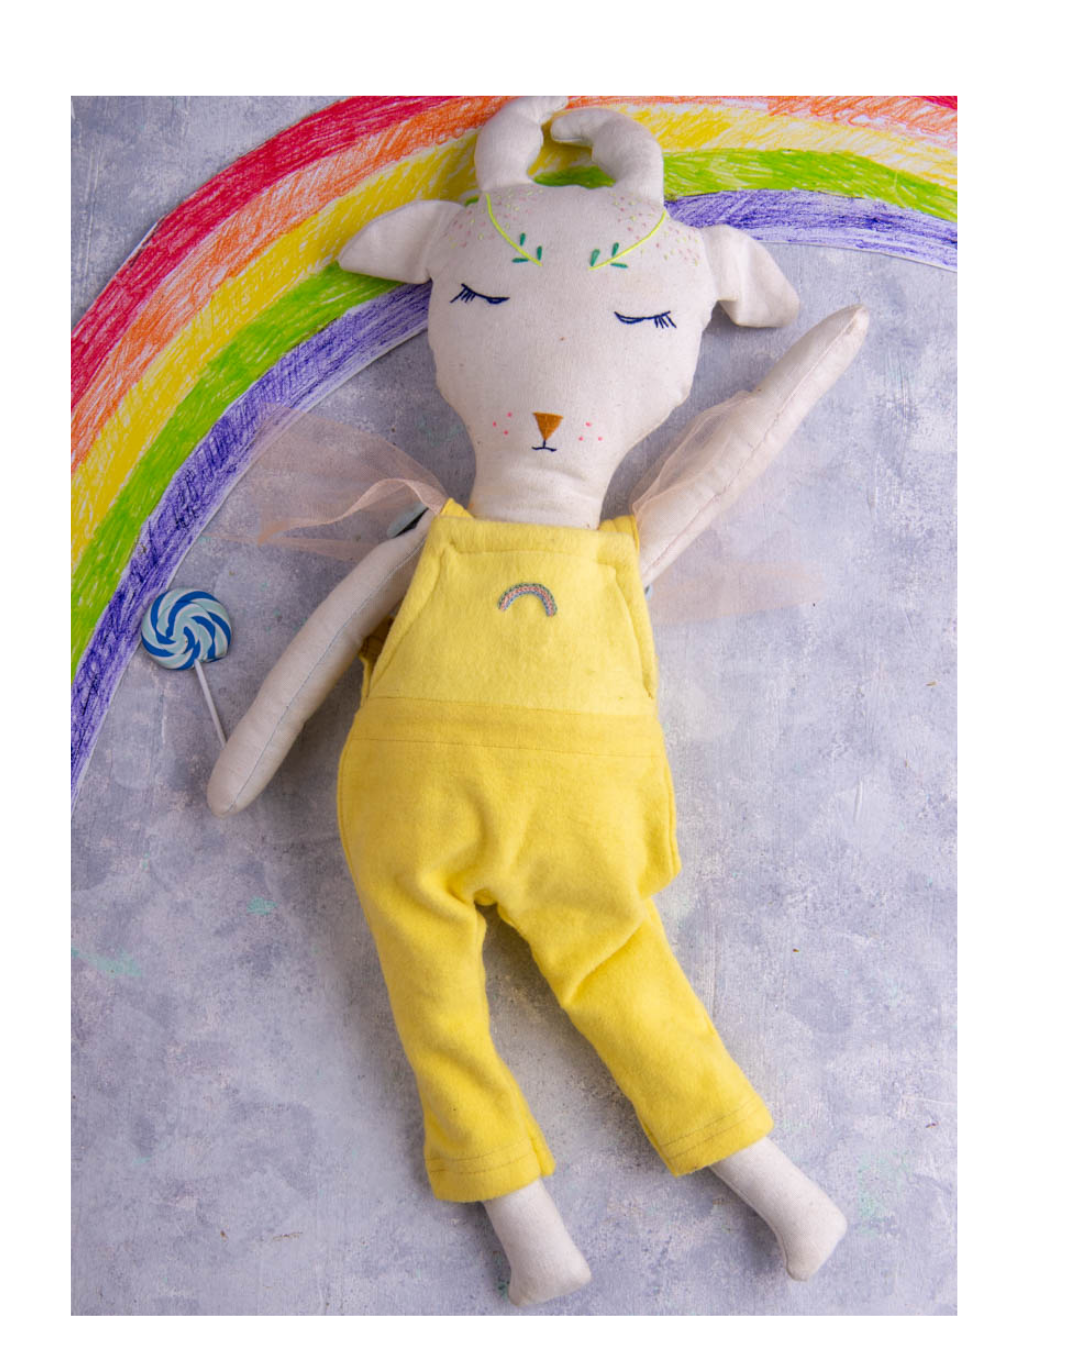 Sam the Caribou - Fabric doll by Pookies - Handmade stuffed toy